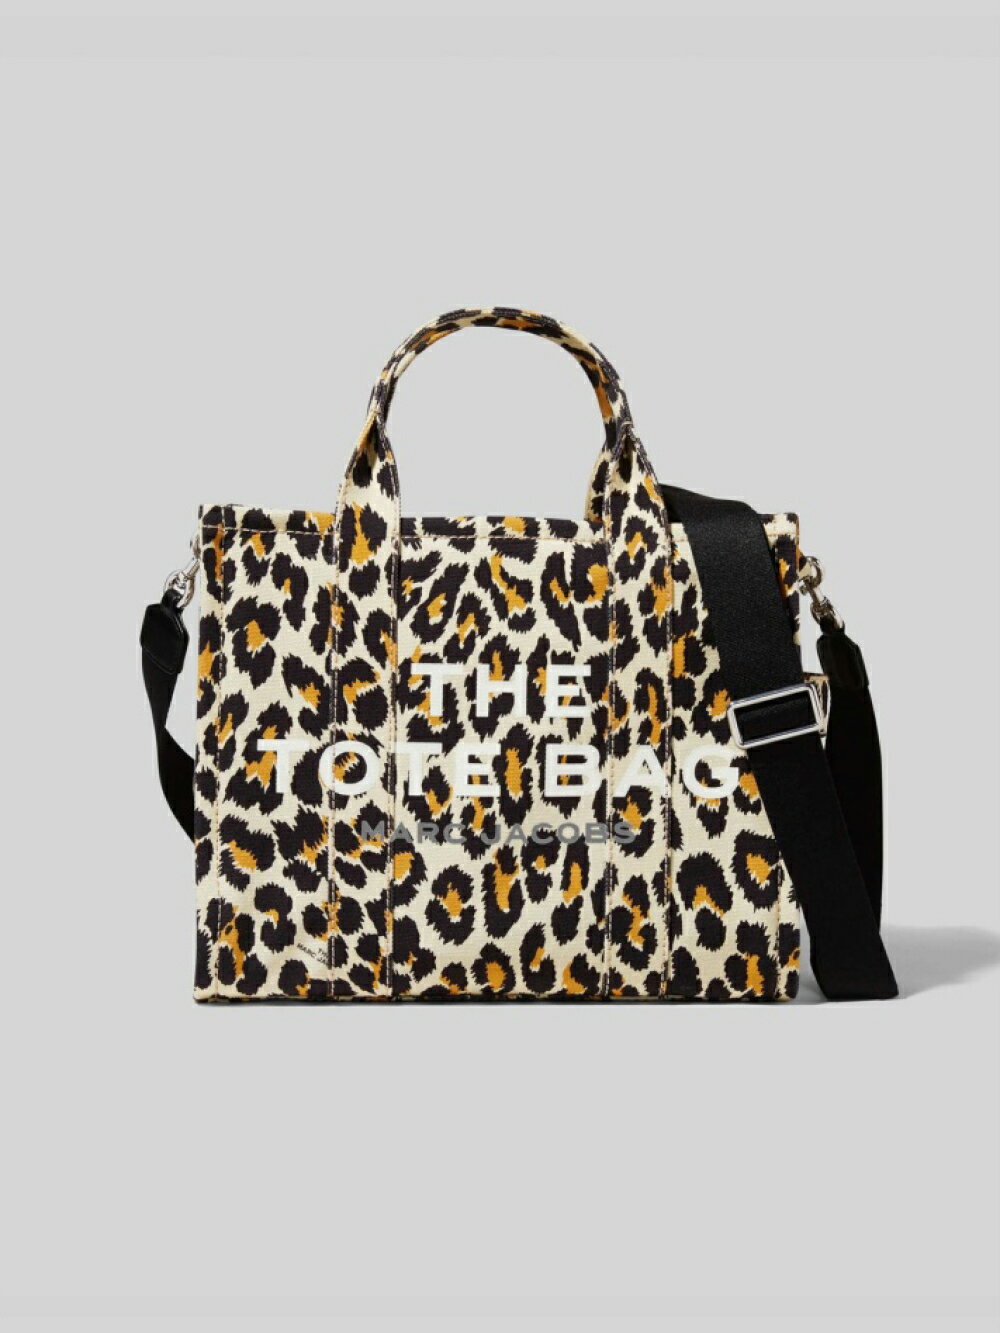 THE LEOPARD SMALL TRAVELER TOTE BAG